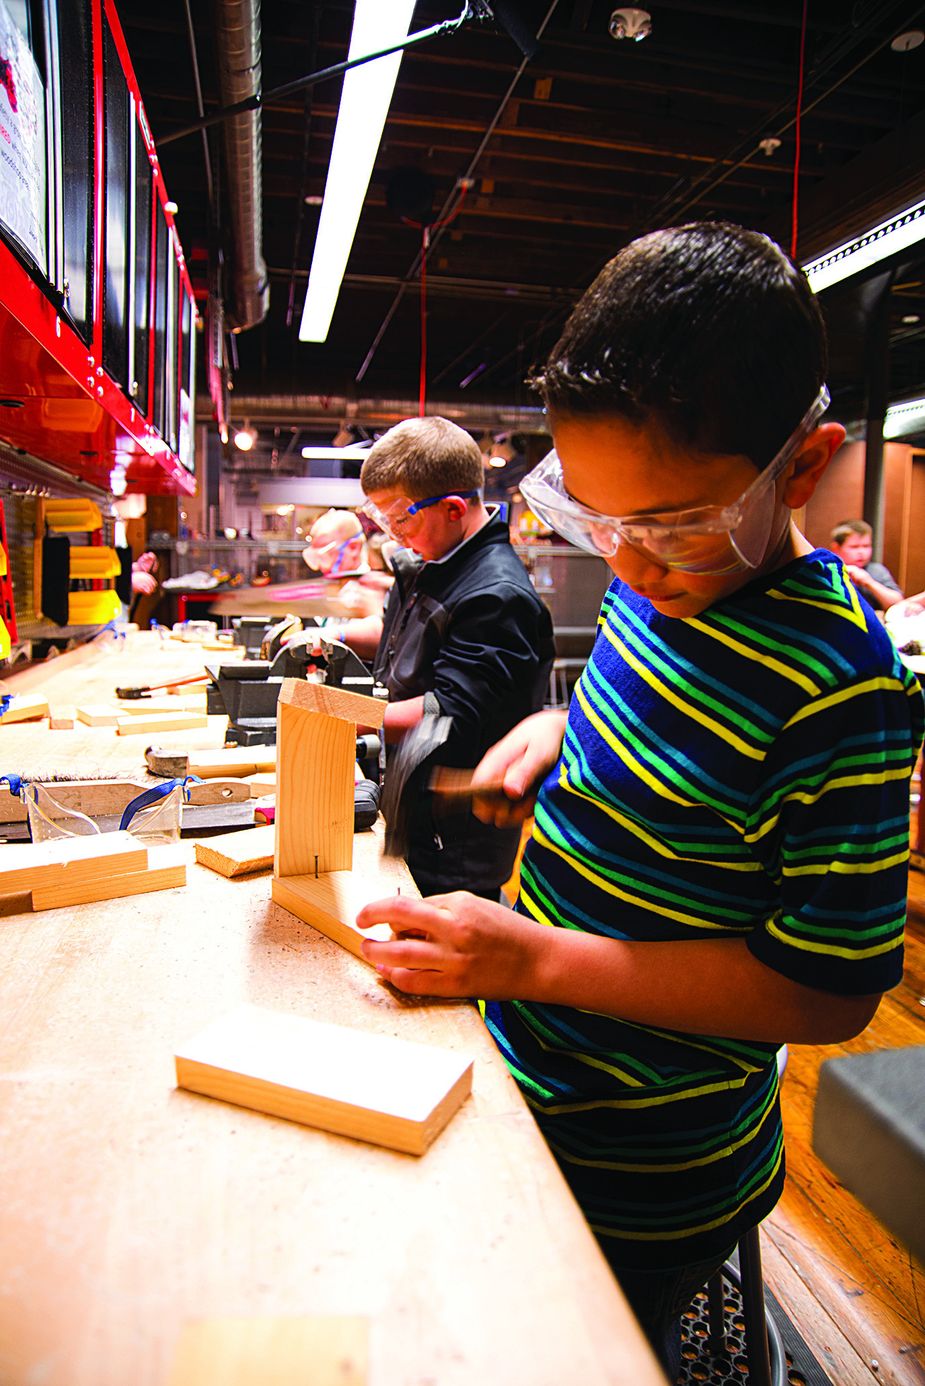 Future carpenters can practice woodworking in safety at Leonardo's Tinkering exhibit. Photo by Kim Baker